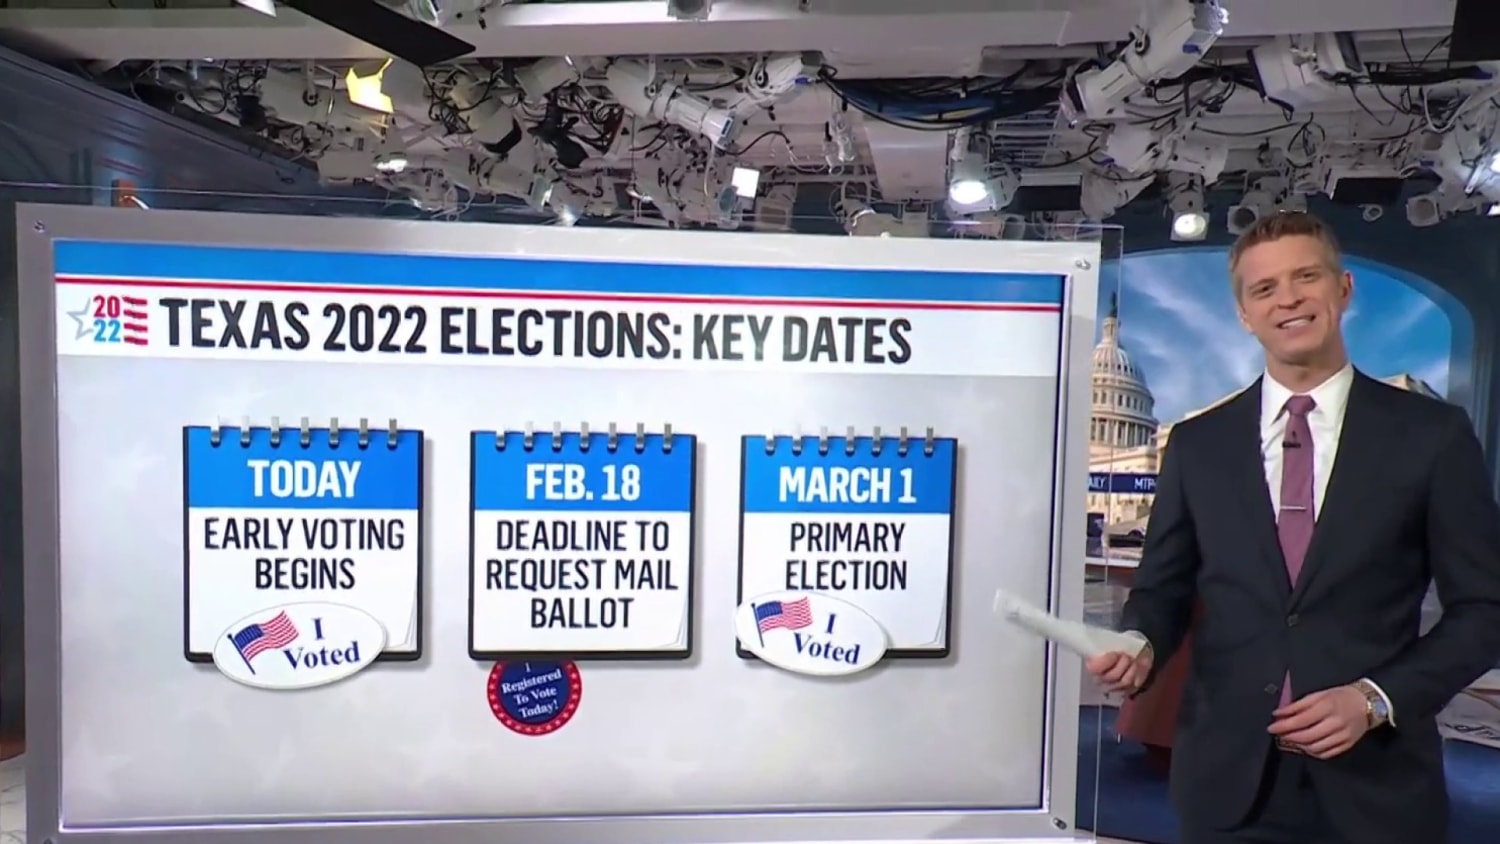 Texas Election Calendar 2022 Meet The Press Blog: Latest News, Analysis And Data Driving The Political  Discussion